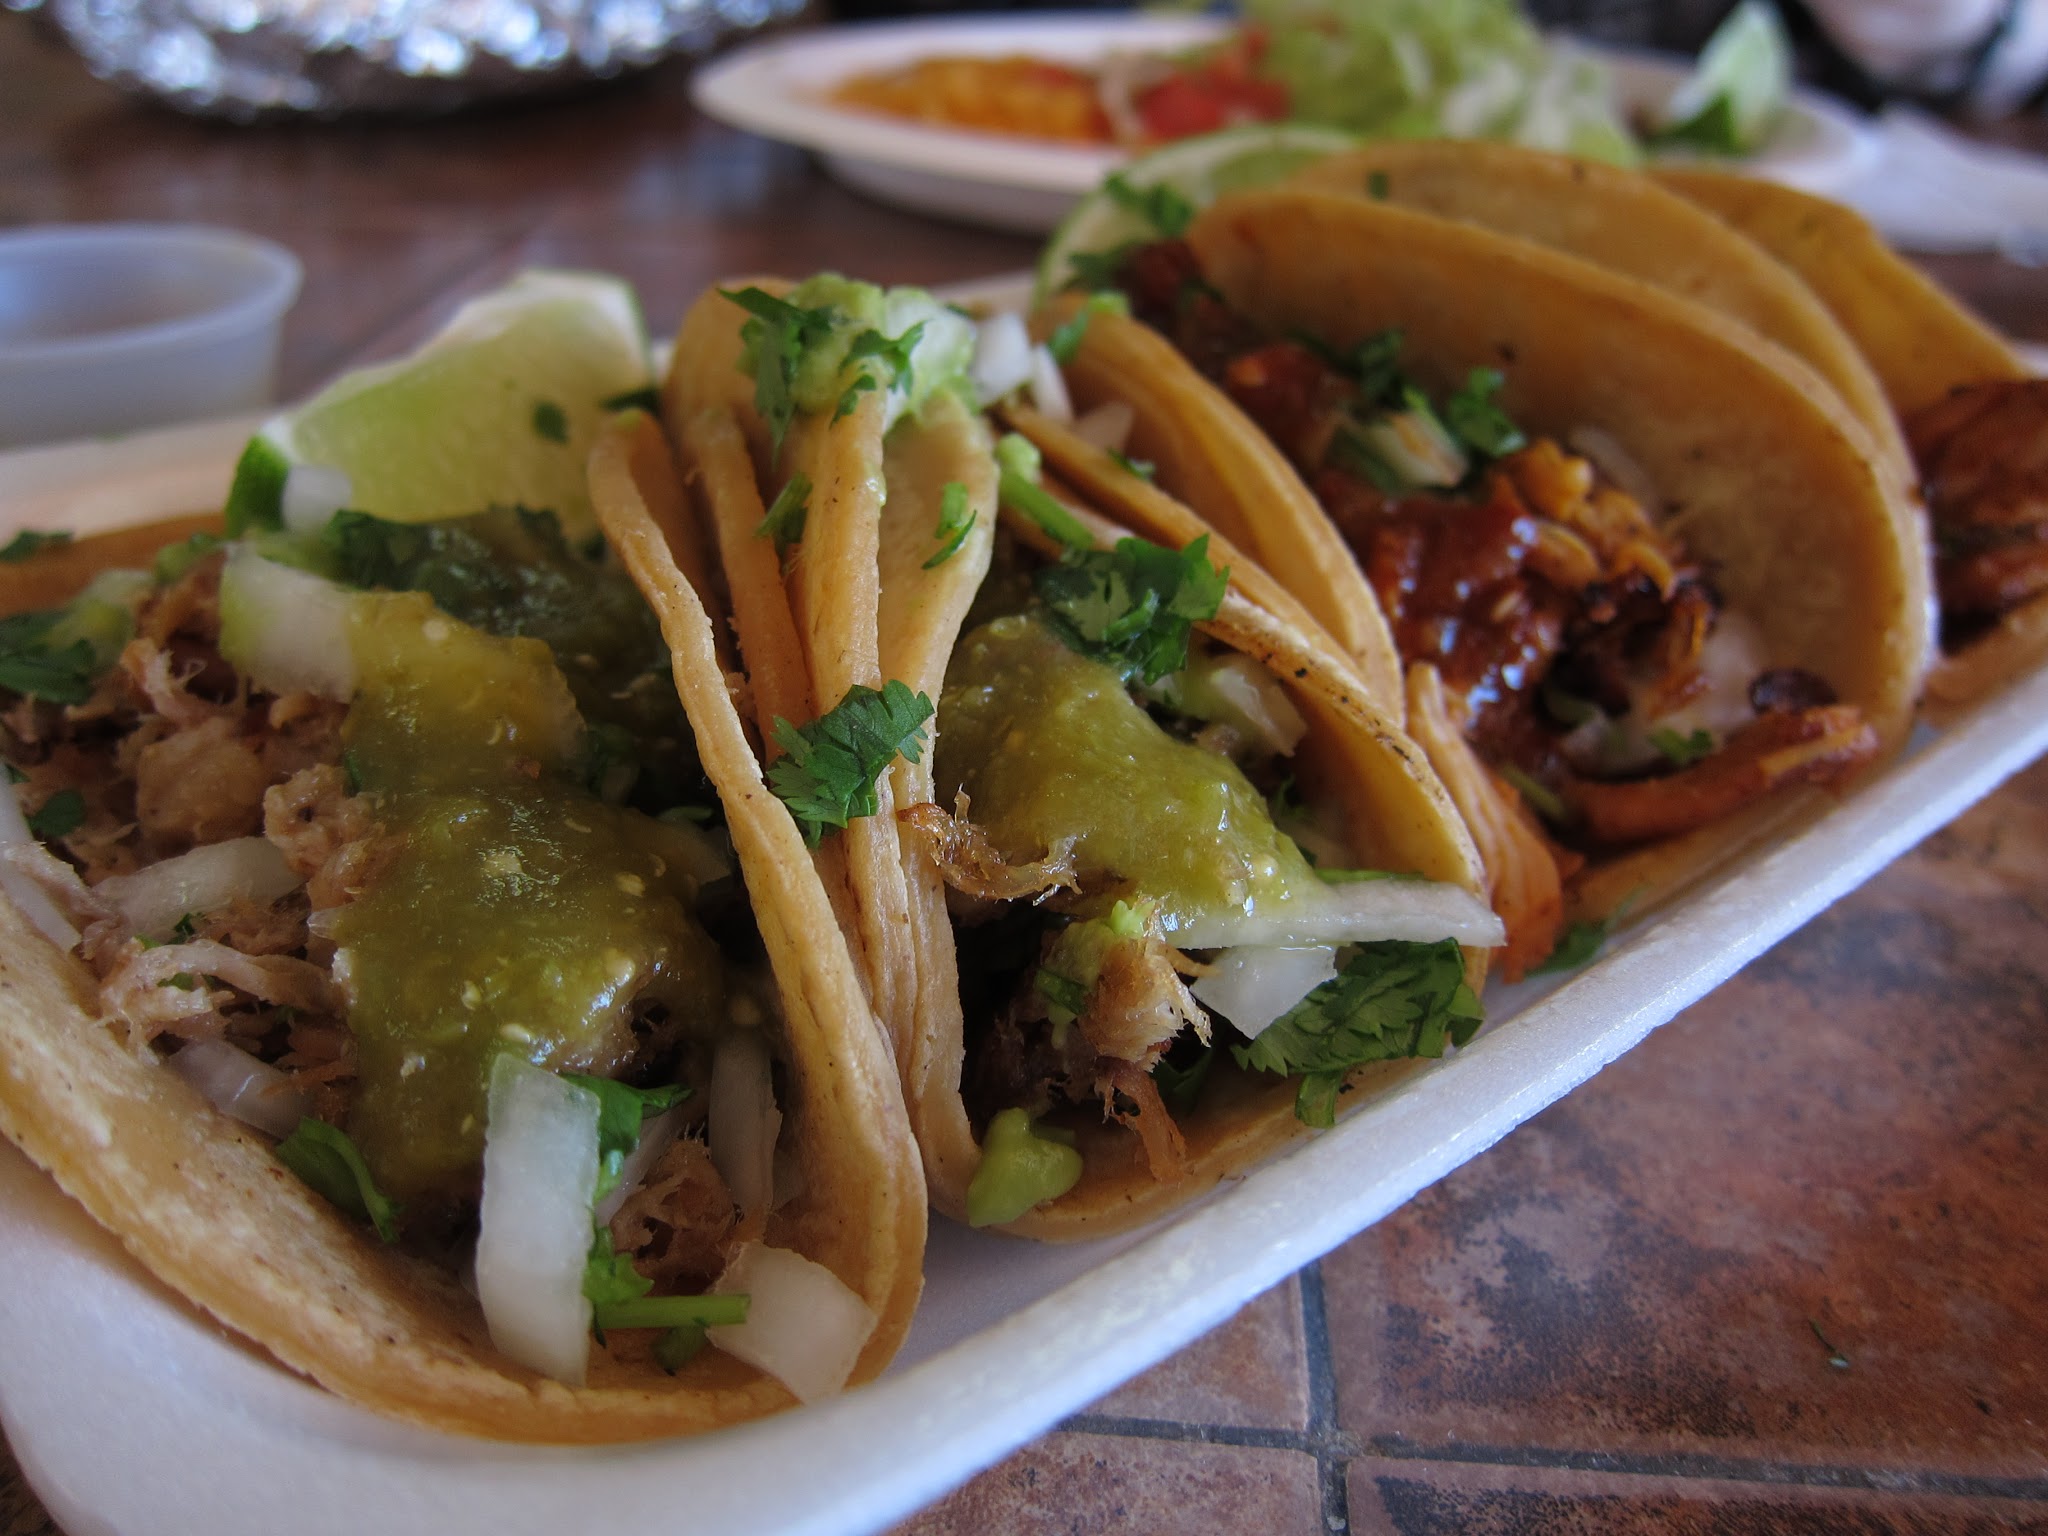 three tacos on a plate next to other food